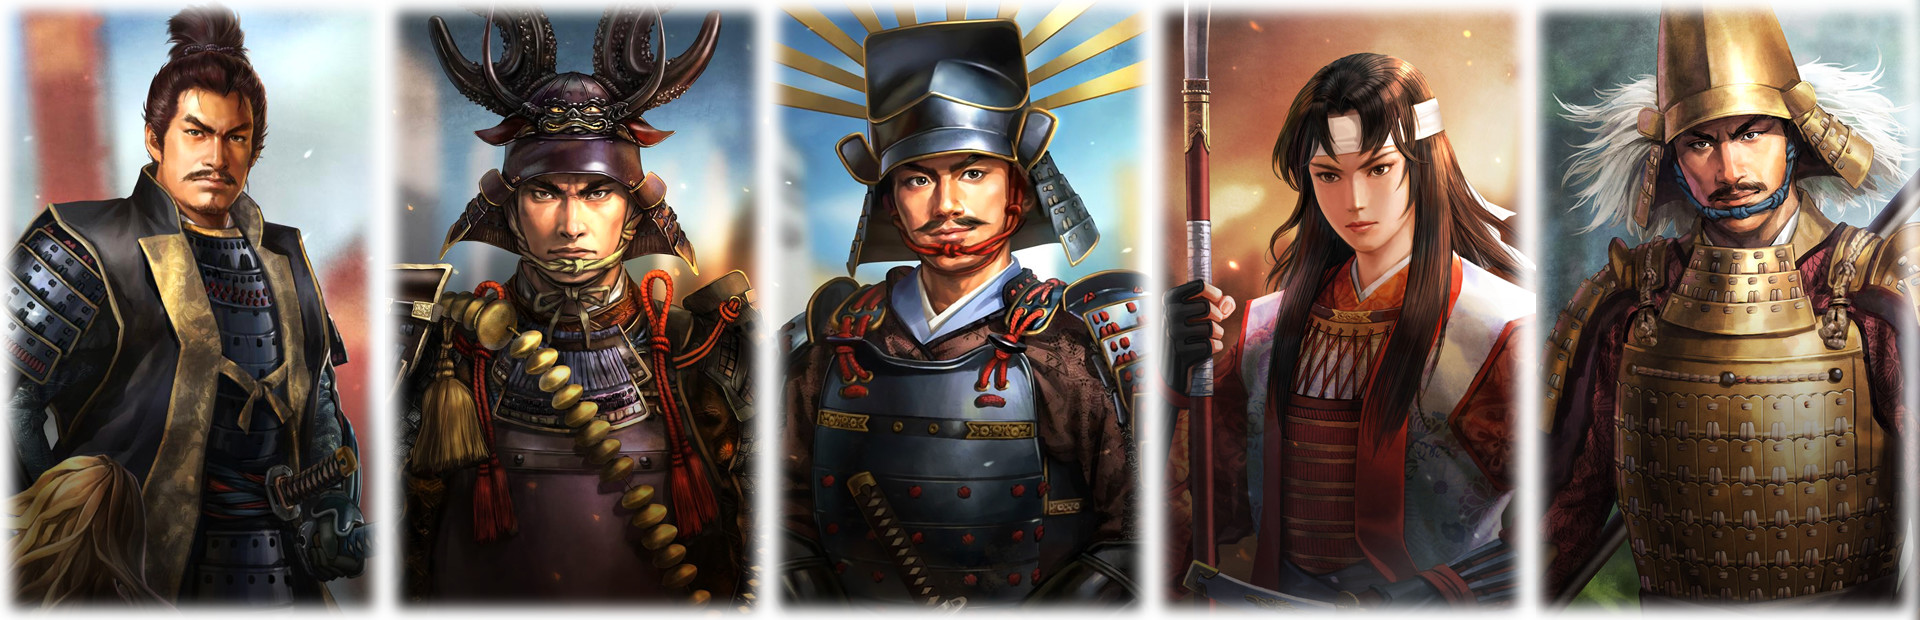 NOBUNAGA'S AMBITION: Sphere of Influence - Ascension cover image